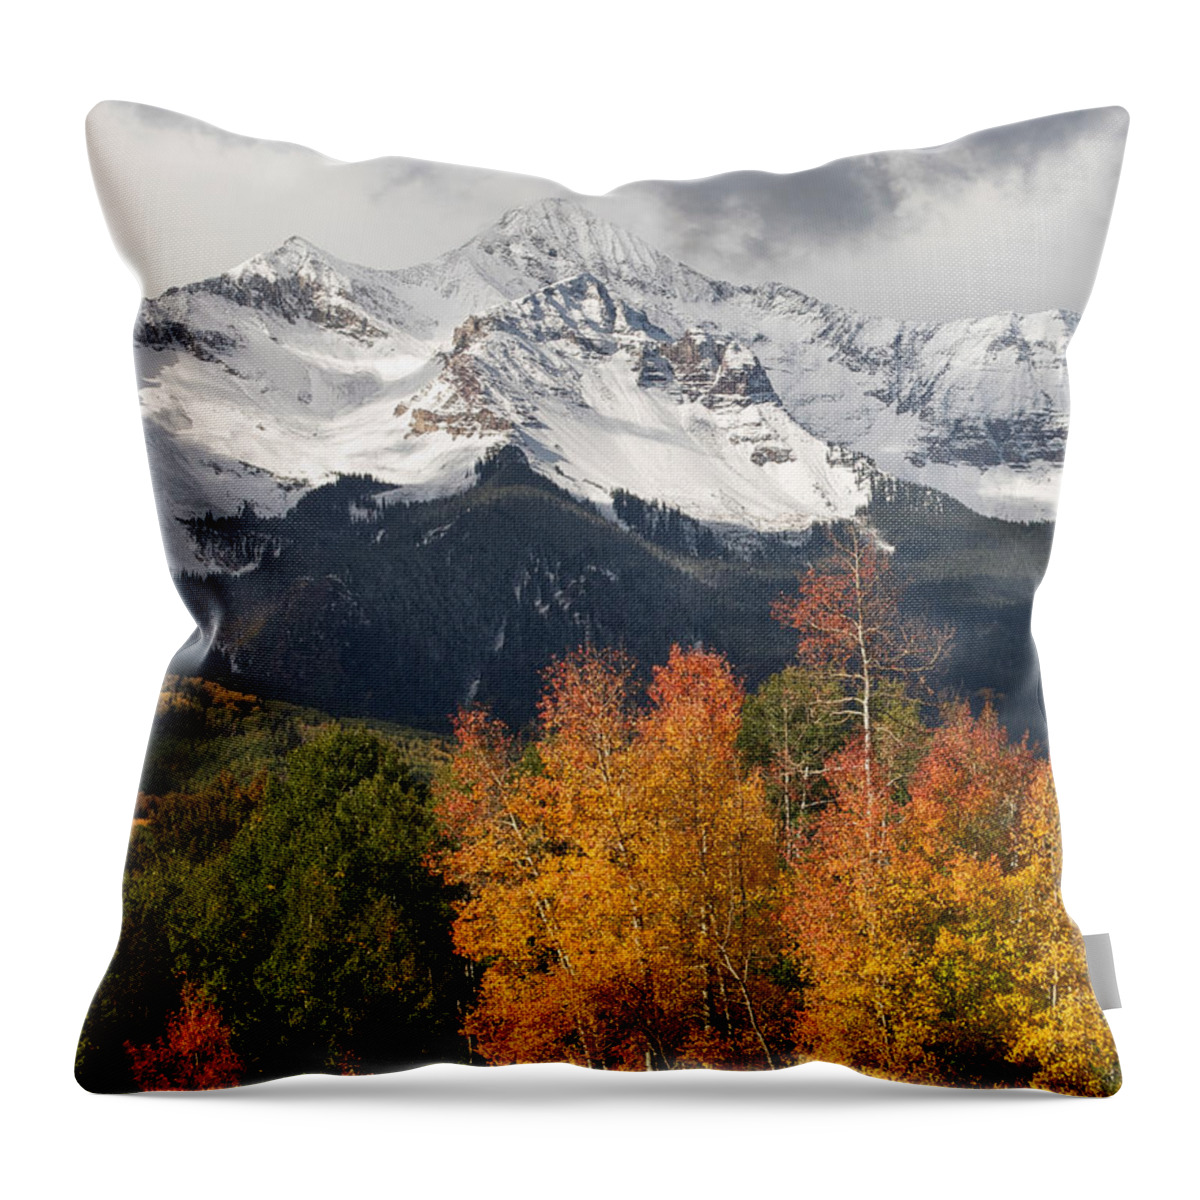 Wilson Throw Pillow featuring the photograph Wilson Peak Colorado by Aaron Spong